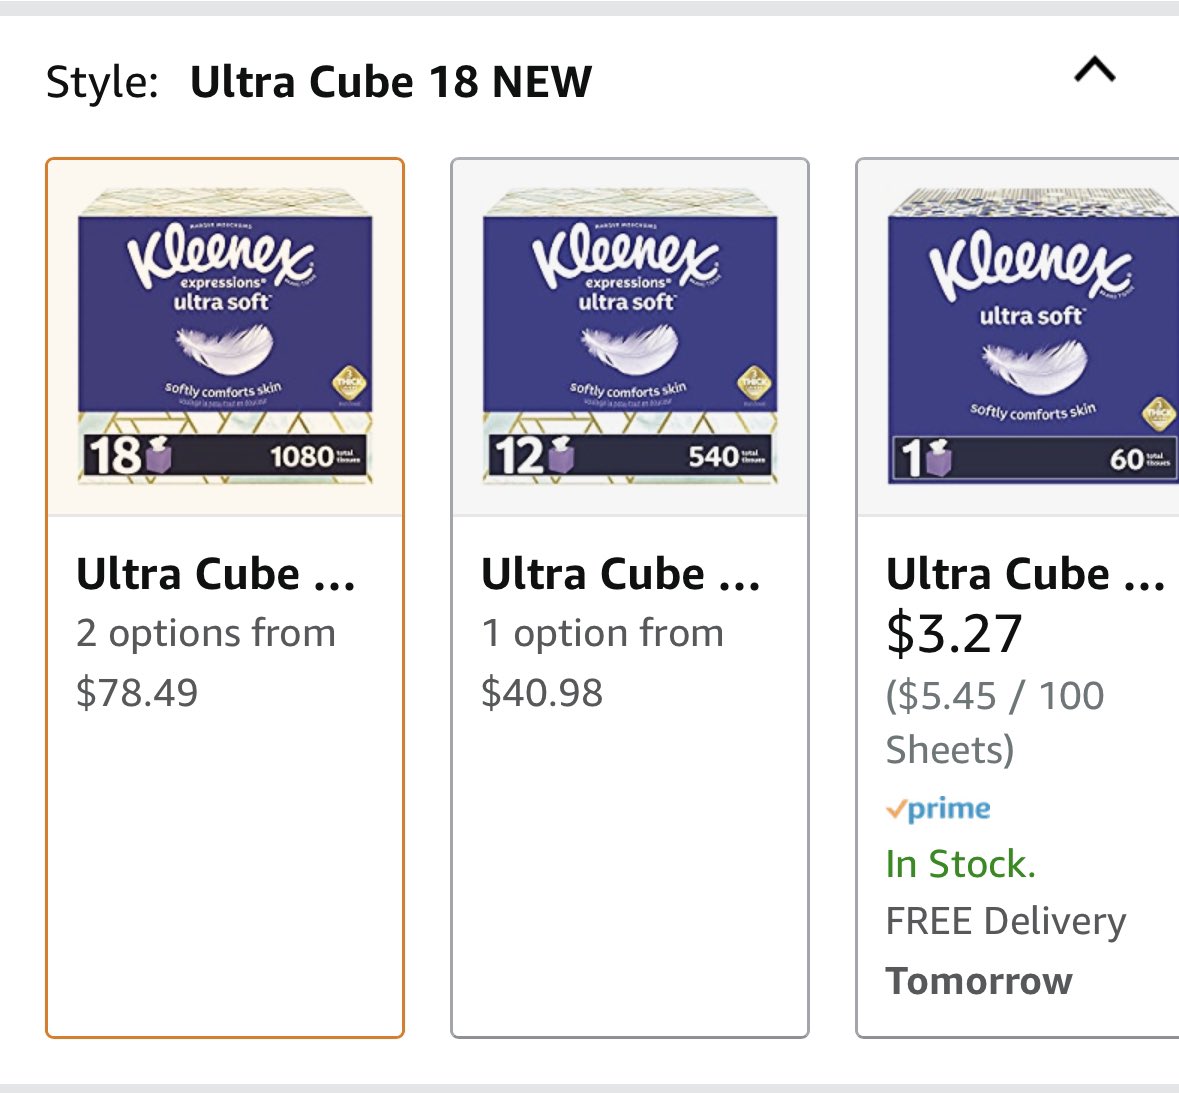 not kleenex raising the price of the cute boxes 100%